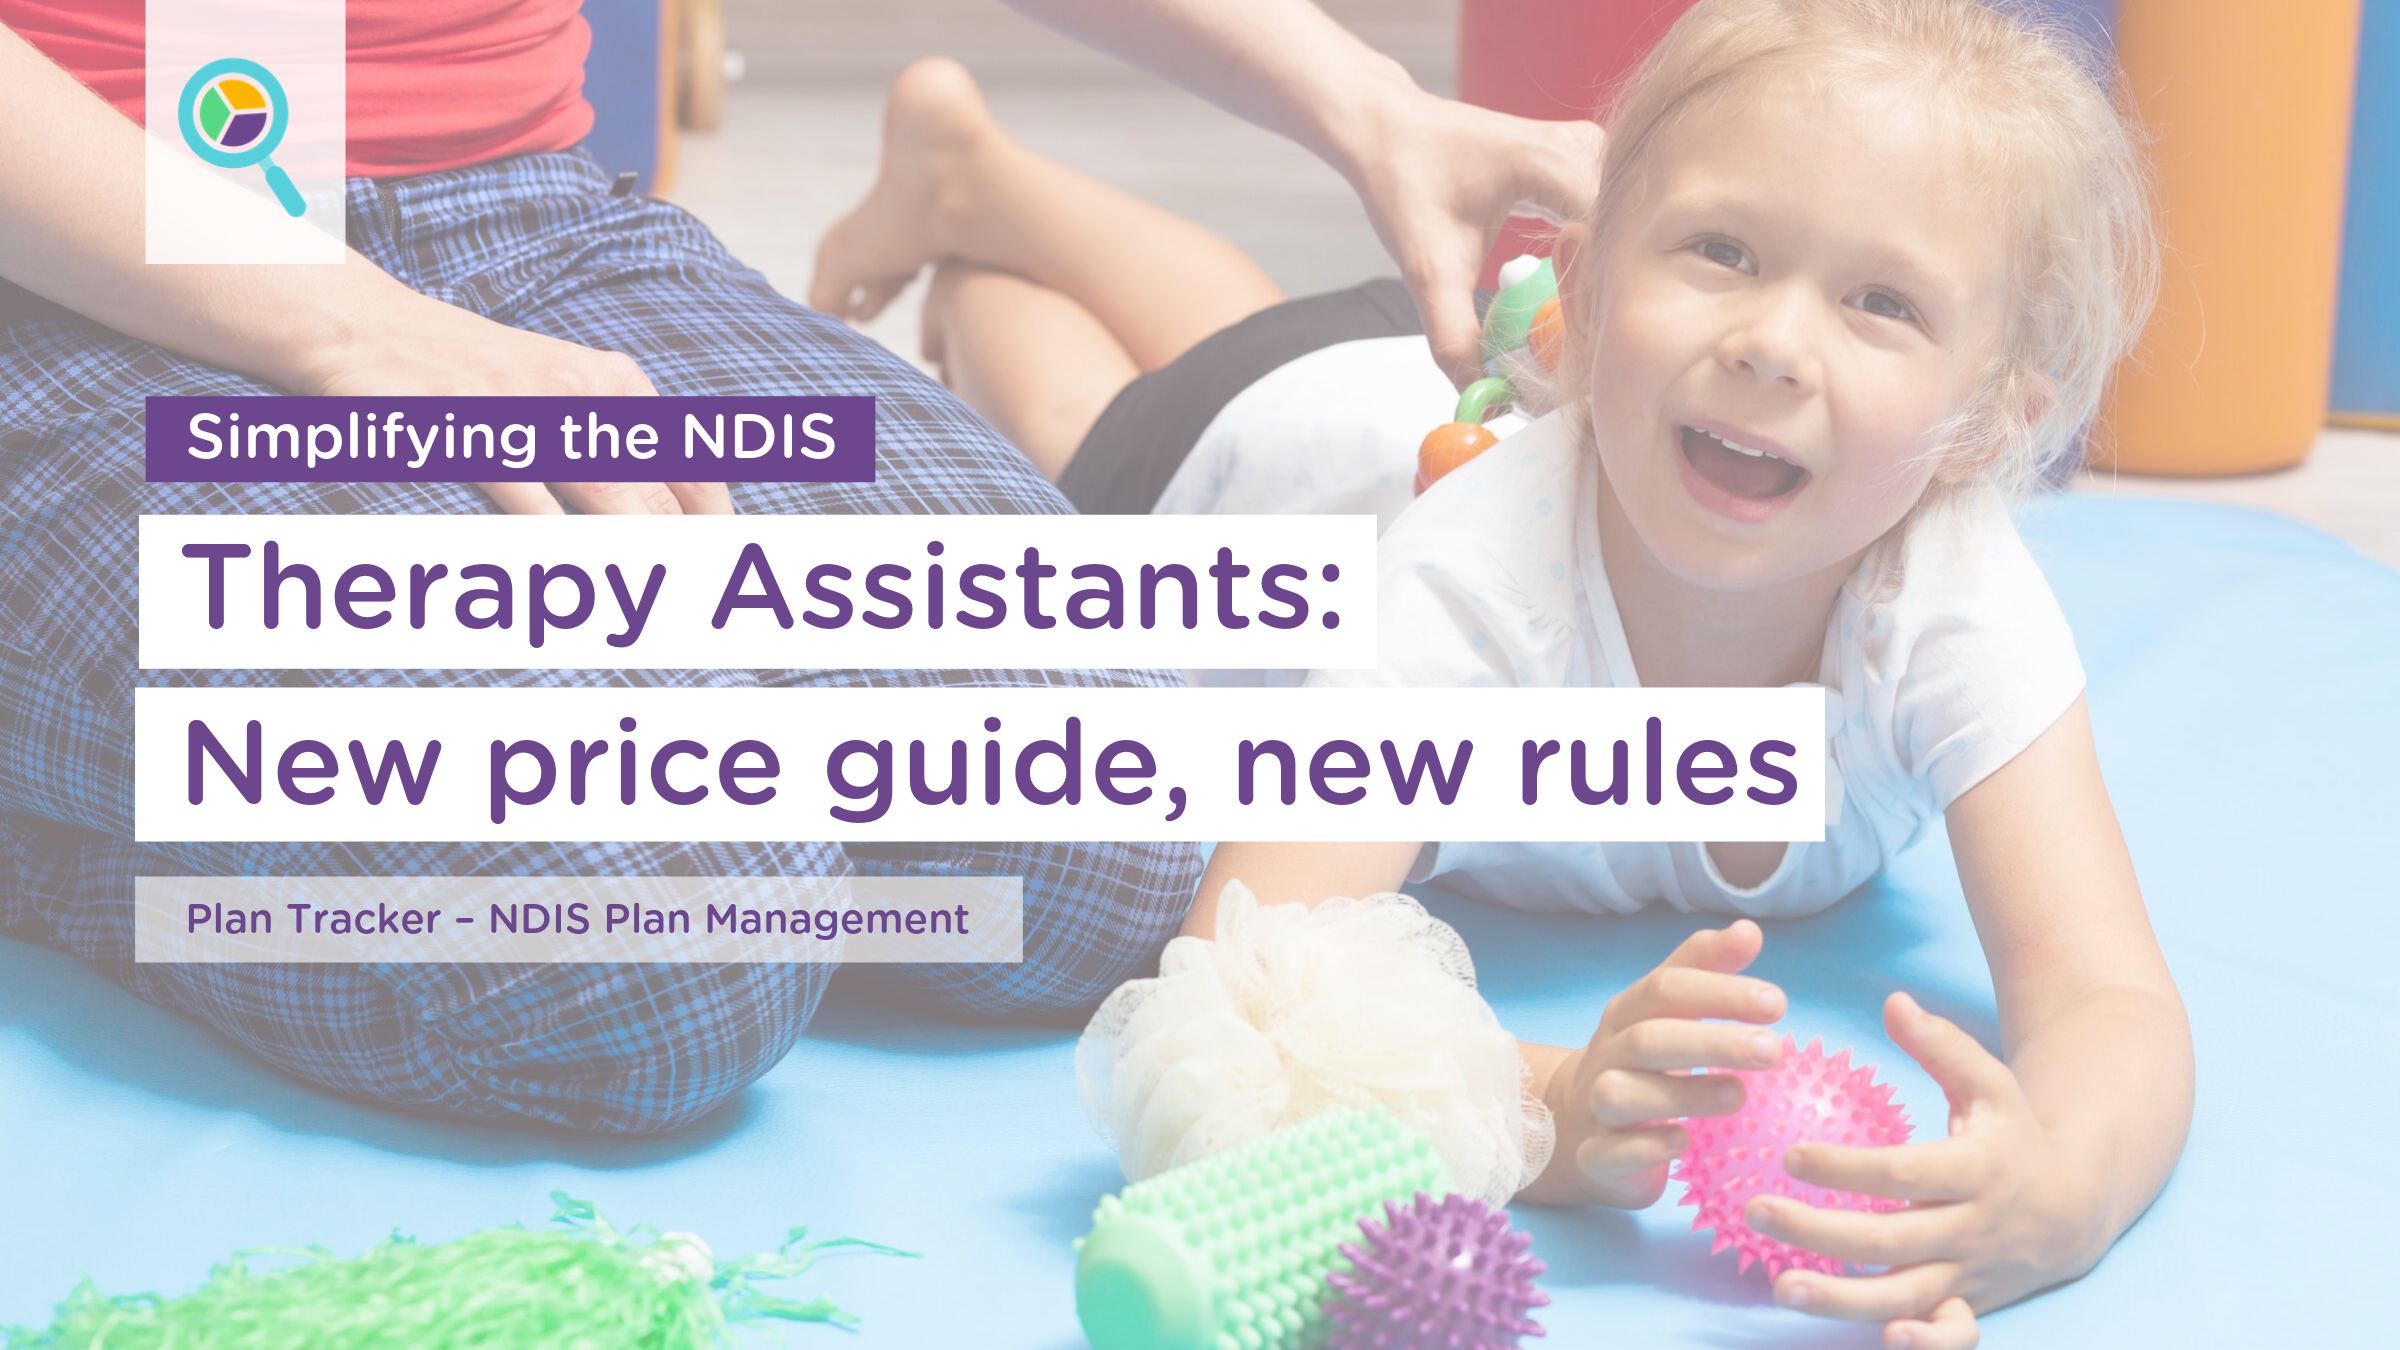 Therapy Assistants: New price guide, new rules